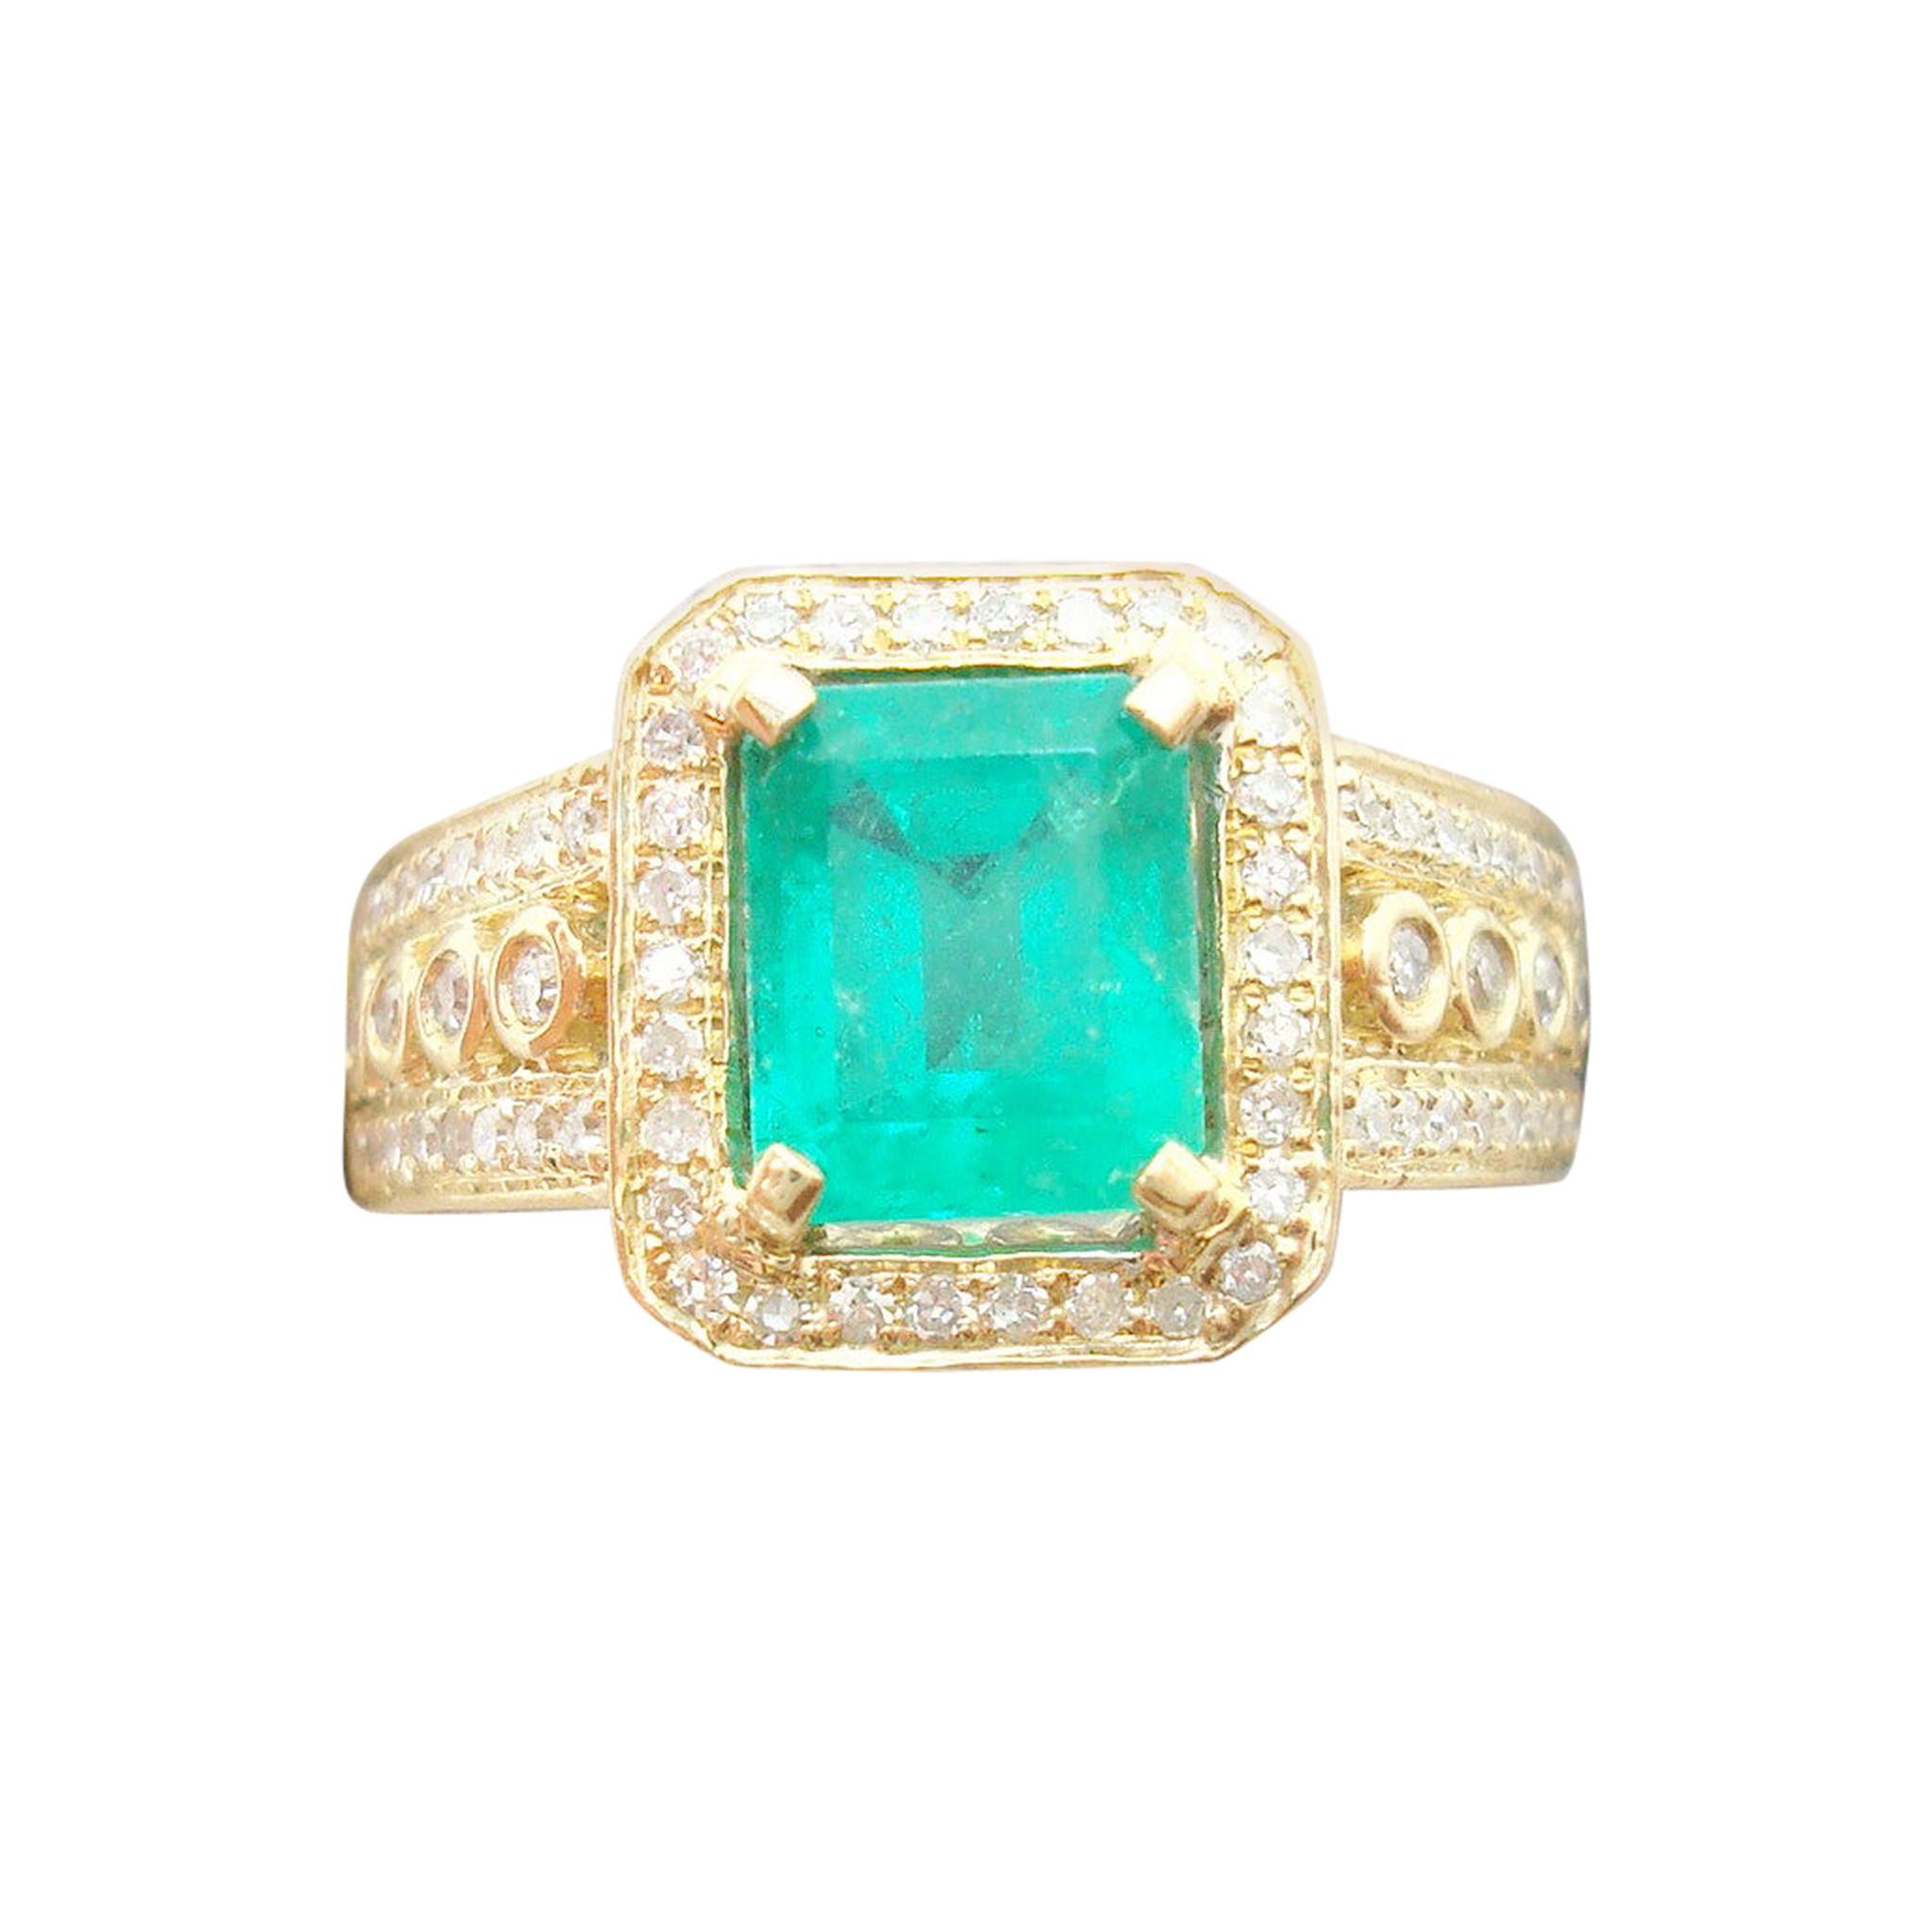 10k Gold 1.62ct Genuine Natural Emerald Ring with 1/4ct Diamonds '#J2604'